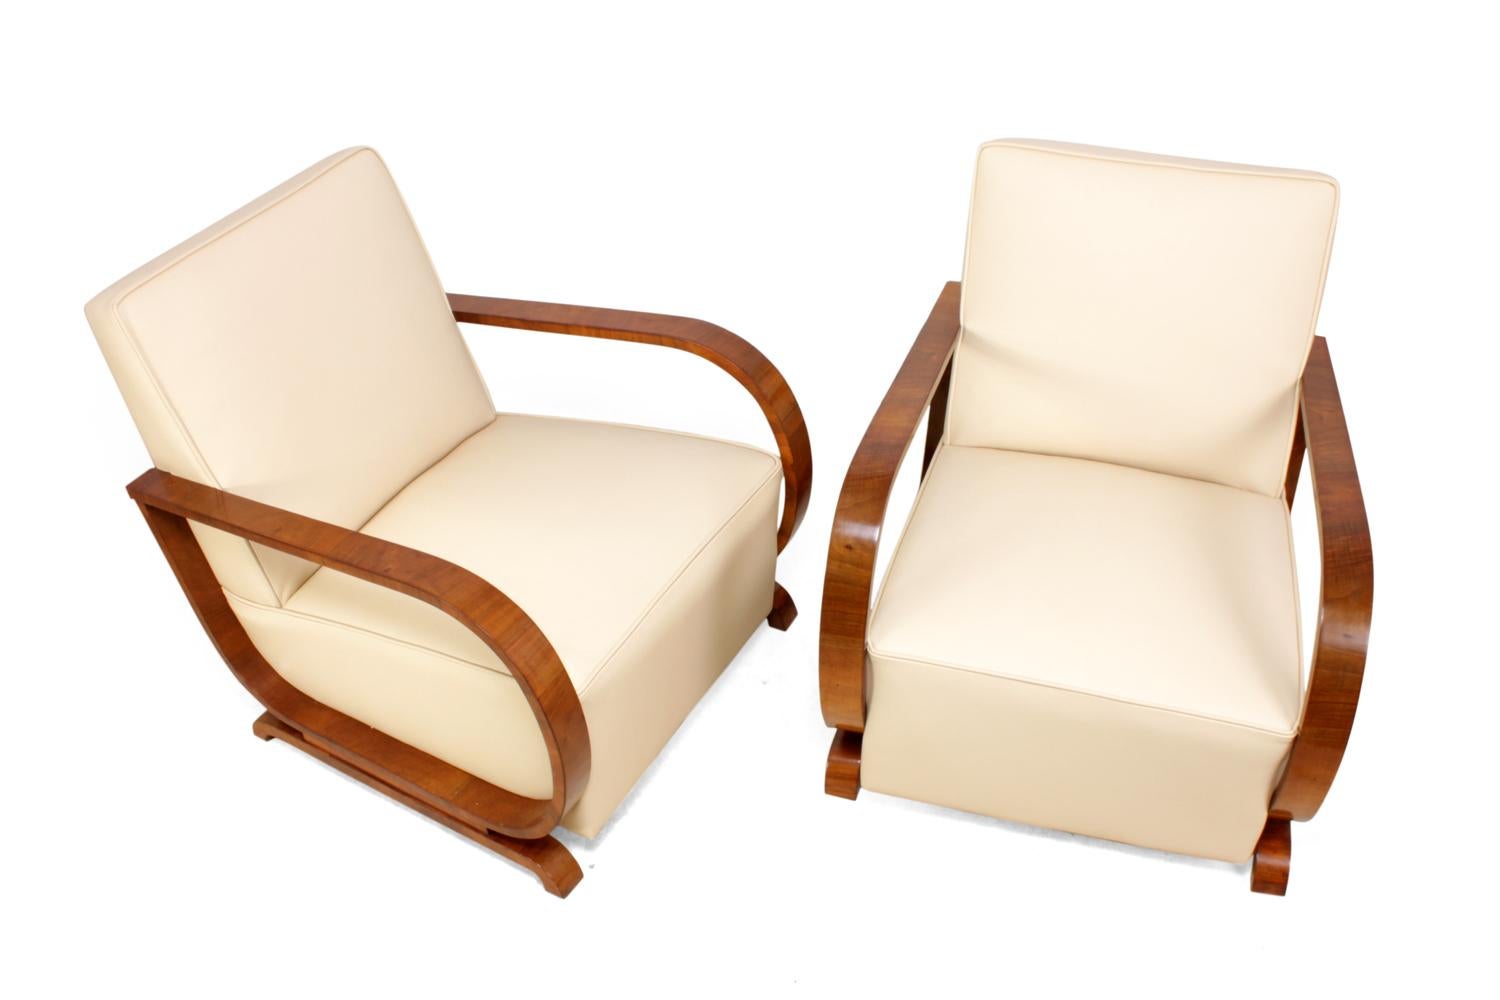 Art Deco Armchairs in Walnut and Leather, circa 1930 
A pair of Art Deco Armchairs produced in Vienna, Austria in the 1930s, these chairs have been fully reupholstered in thick hide leather and the show wood has been professionally hand polished